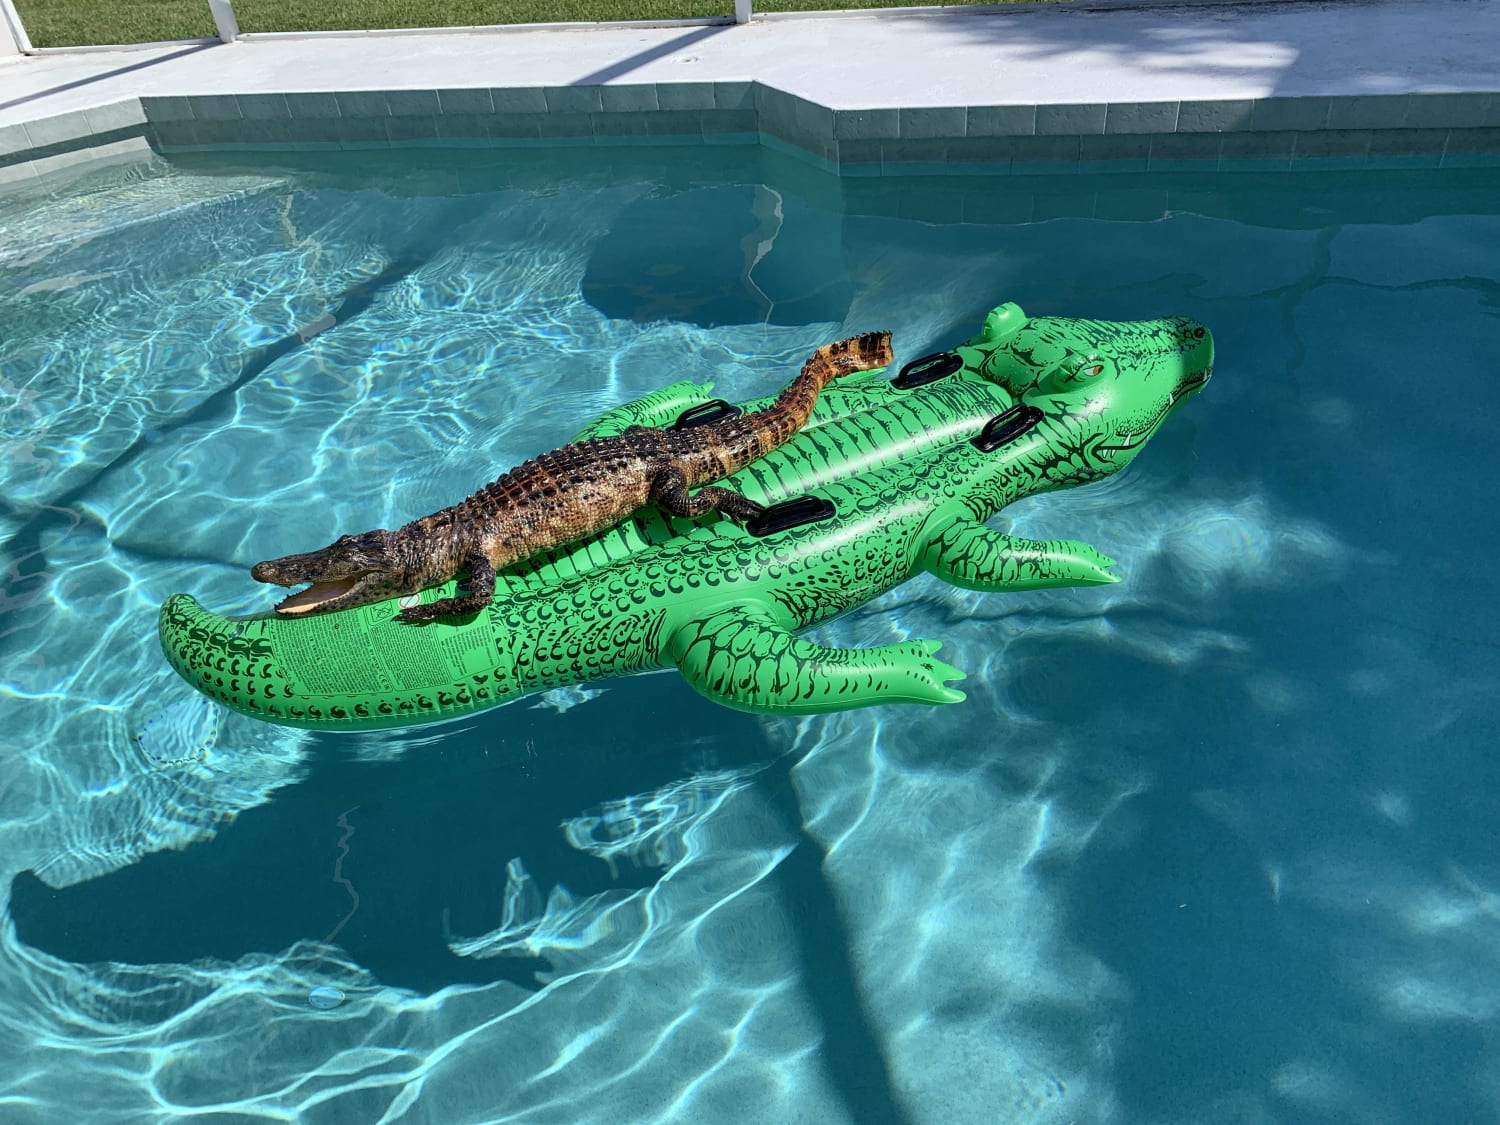 Vacationers Find Alligator Lounging on Alligator Pool Float at Their Miami Airbnb